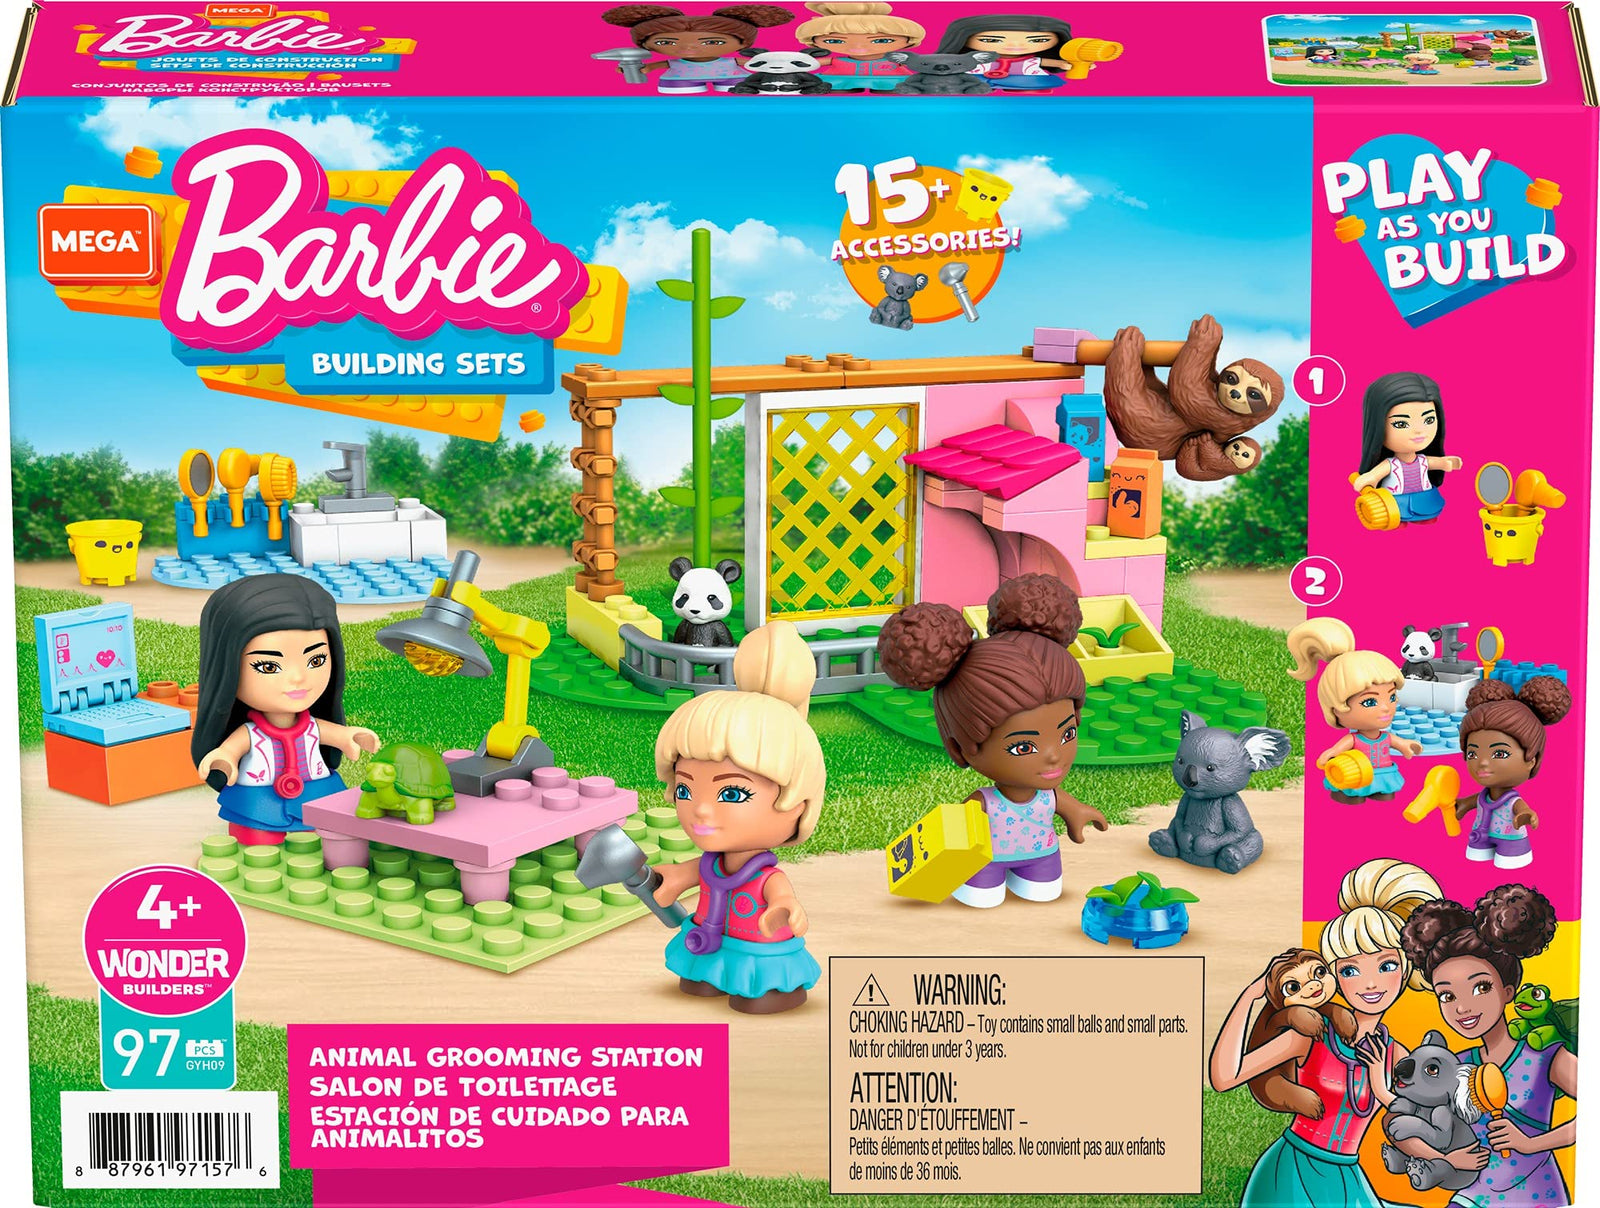 Mega Barbie Animal Grooming Station Building Set, 97 Bricks and Pieces with Fashion and Roleplay Accessories, 3 Micro-Dolls, 1 Panda, 1 Koala, 1 Turtle and 2 Sloths, Toy Gift Set for Ages 5 and up